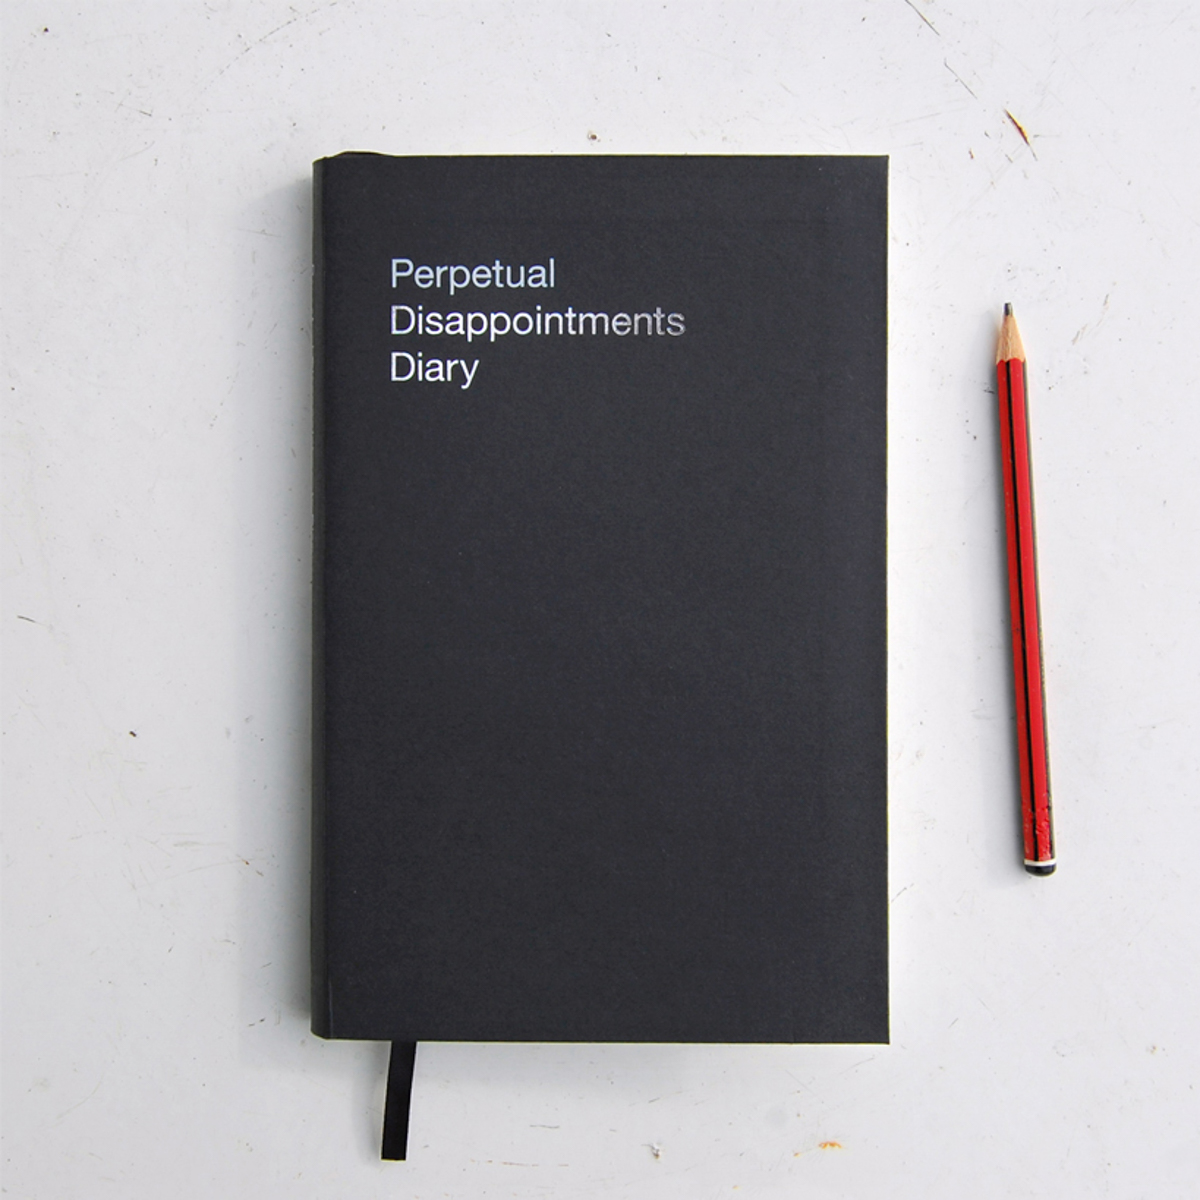 Prepare to be Perpetually Disappointed with This Disappointments Diary